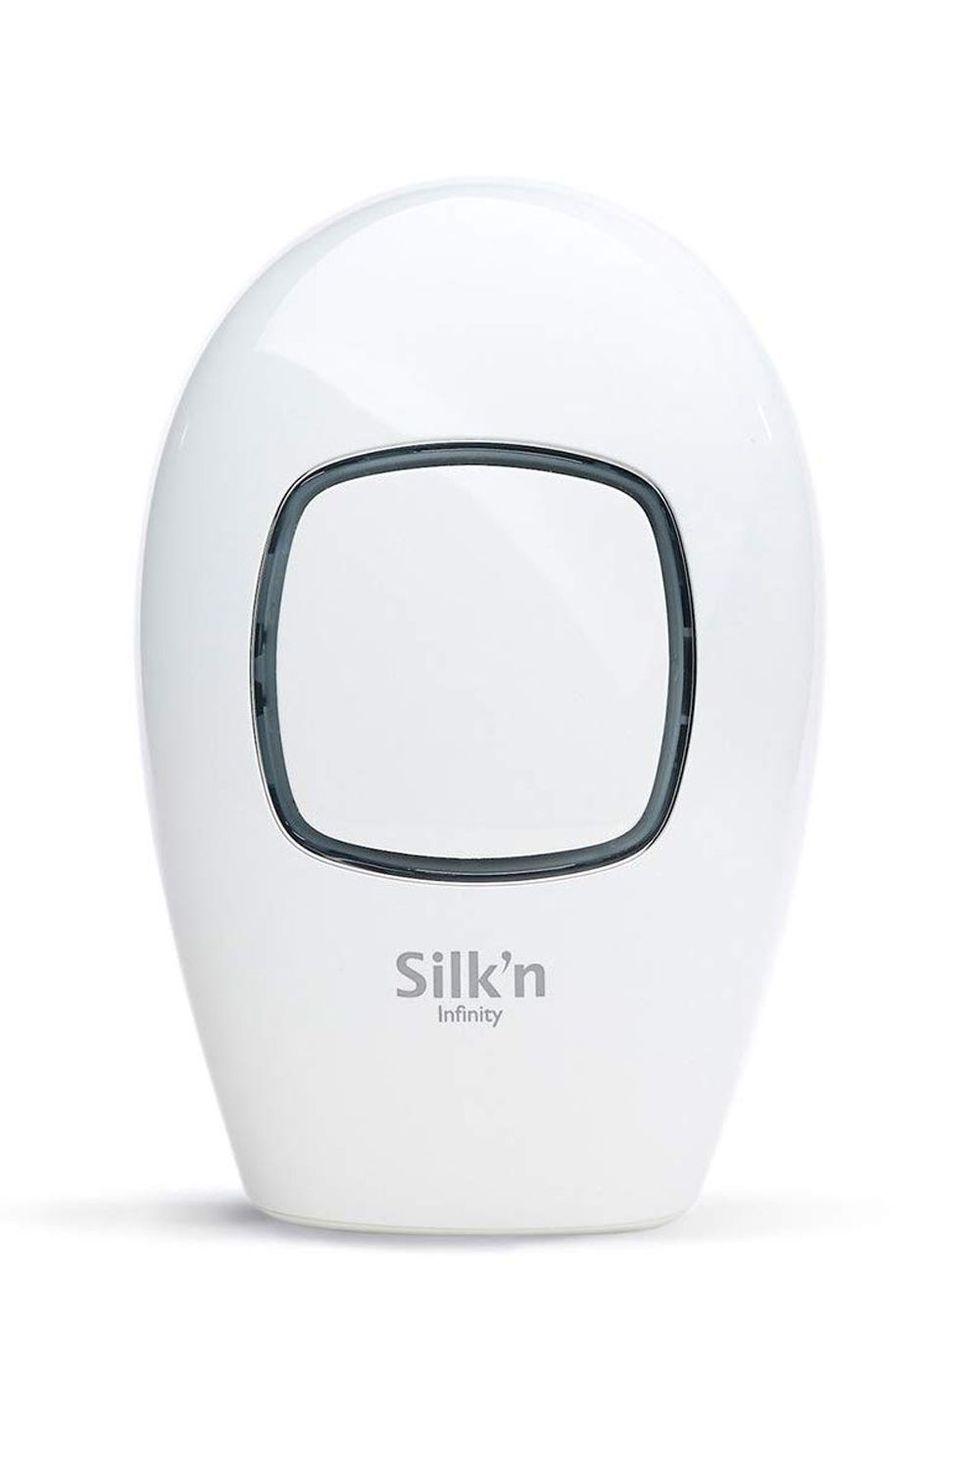 Silk’n Infinity At-Home Permanent Hair Removal